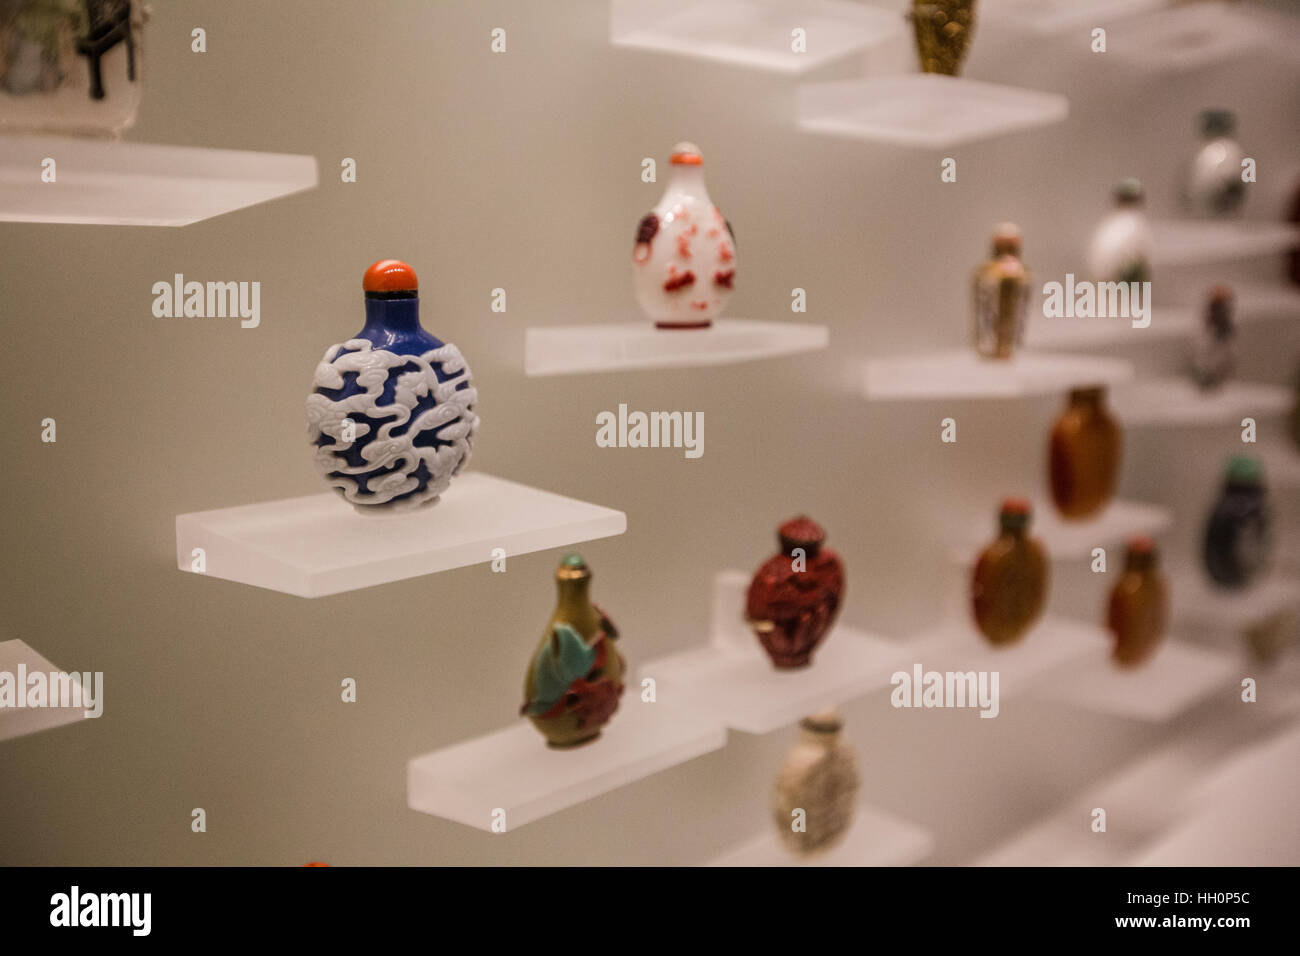 Chinese Snuff Bottles - The Walters Art Museum